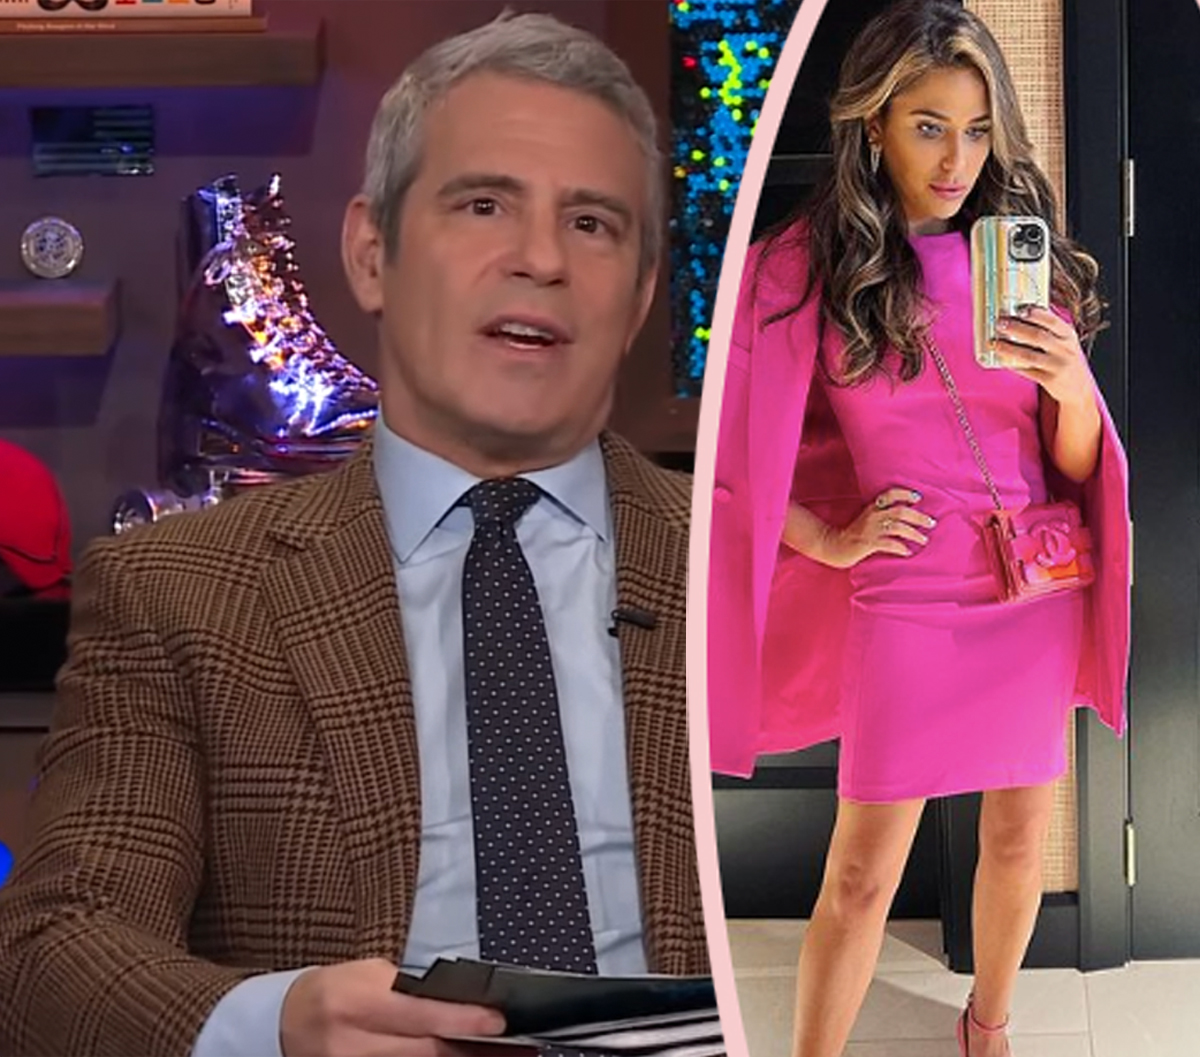 #Andy Cohen Addresses Lizzy Savetsky Quitting RHONY Reboot Over ‘Antisemitic Attacks’